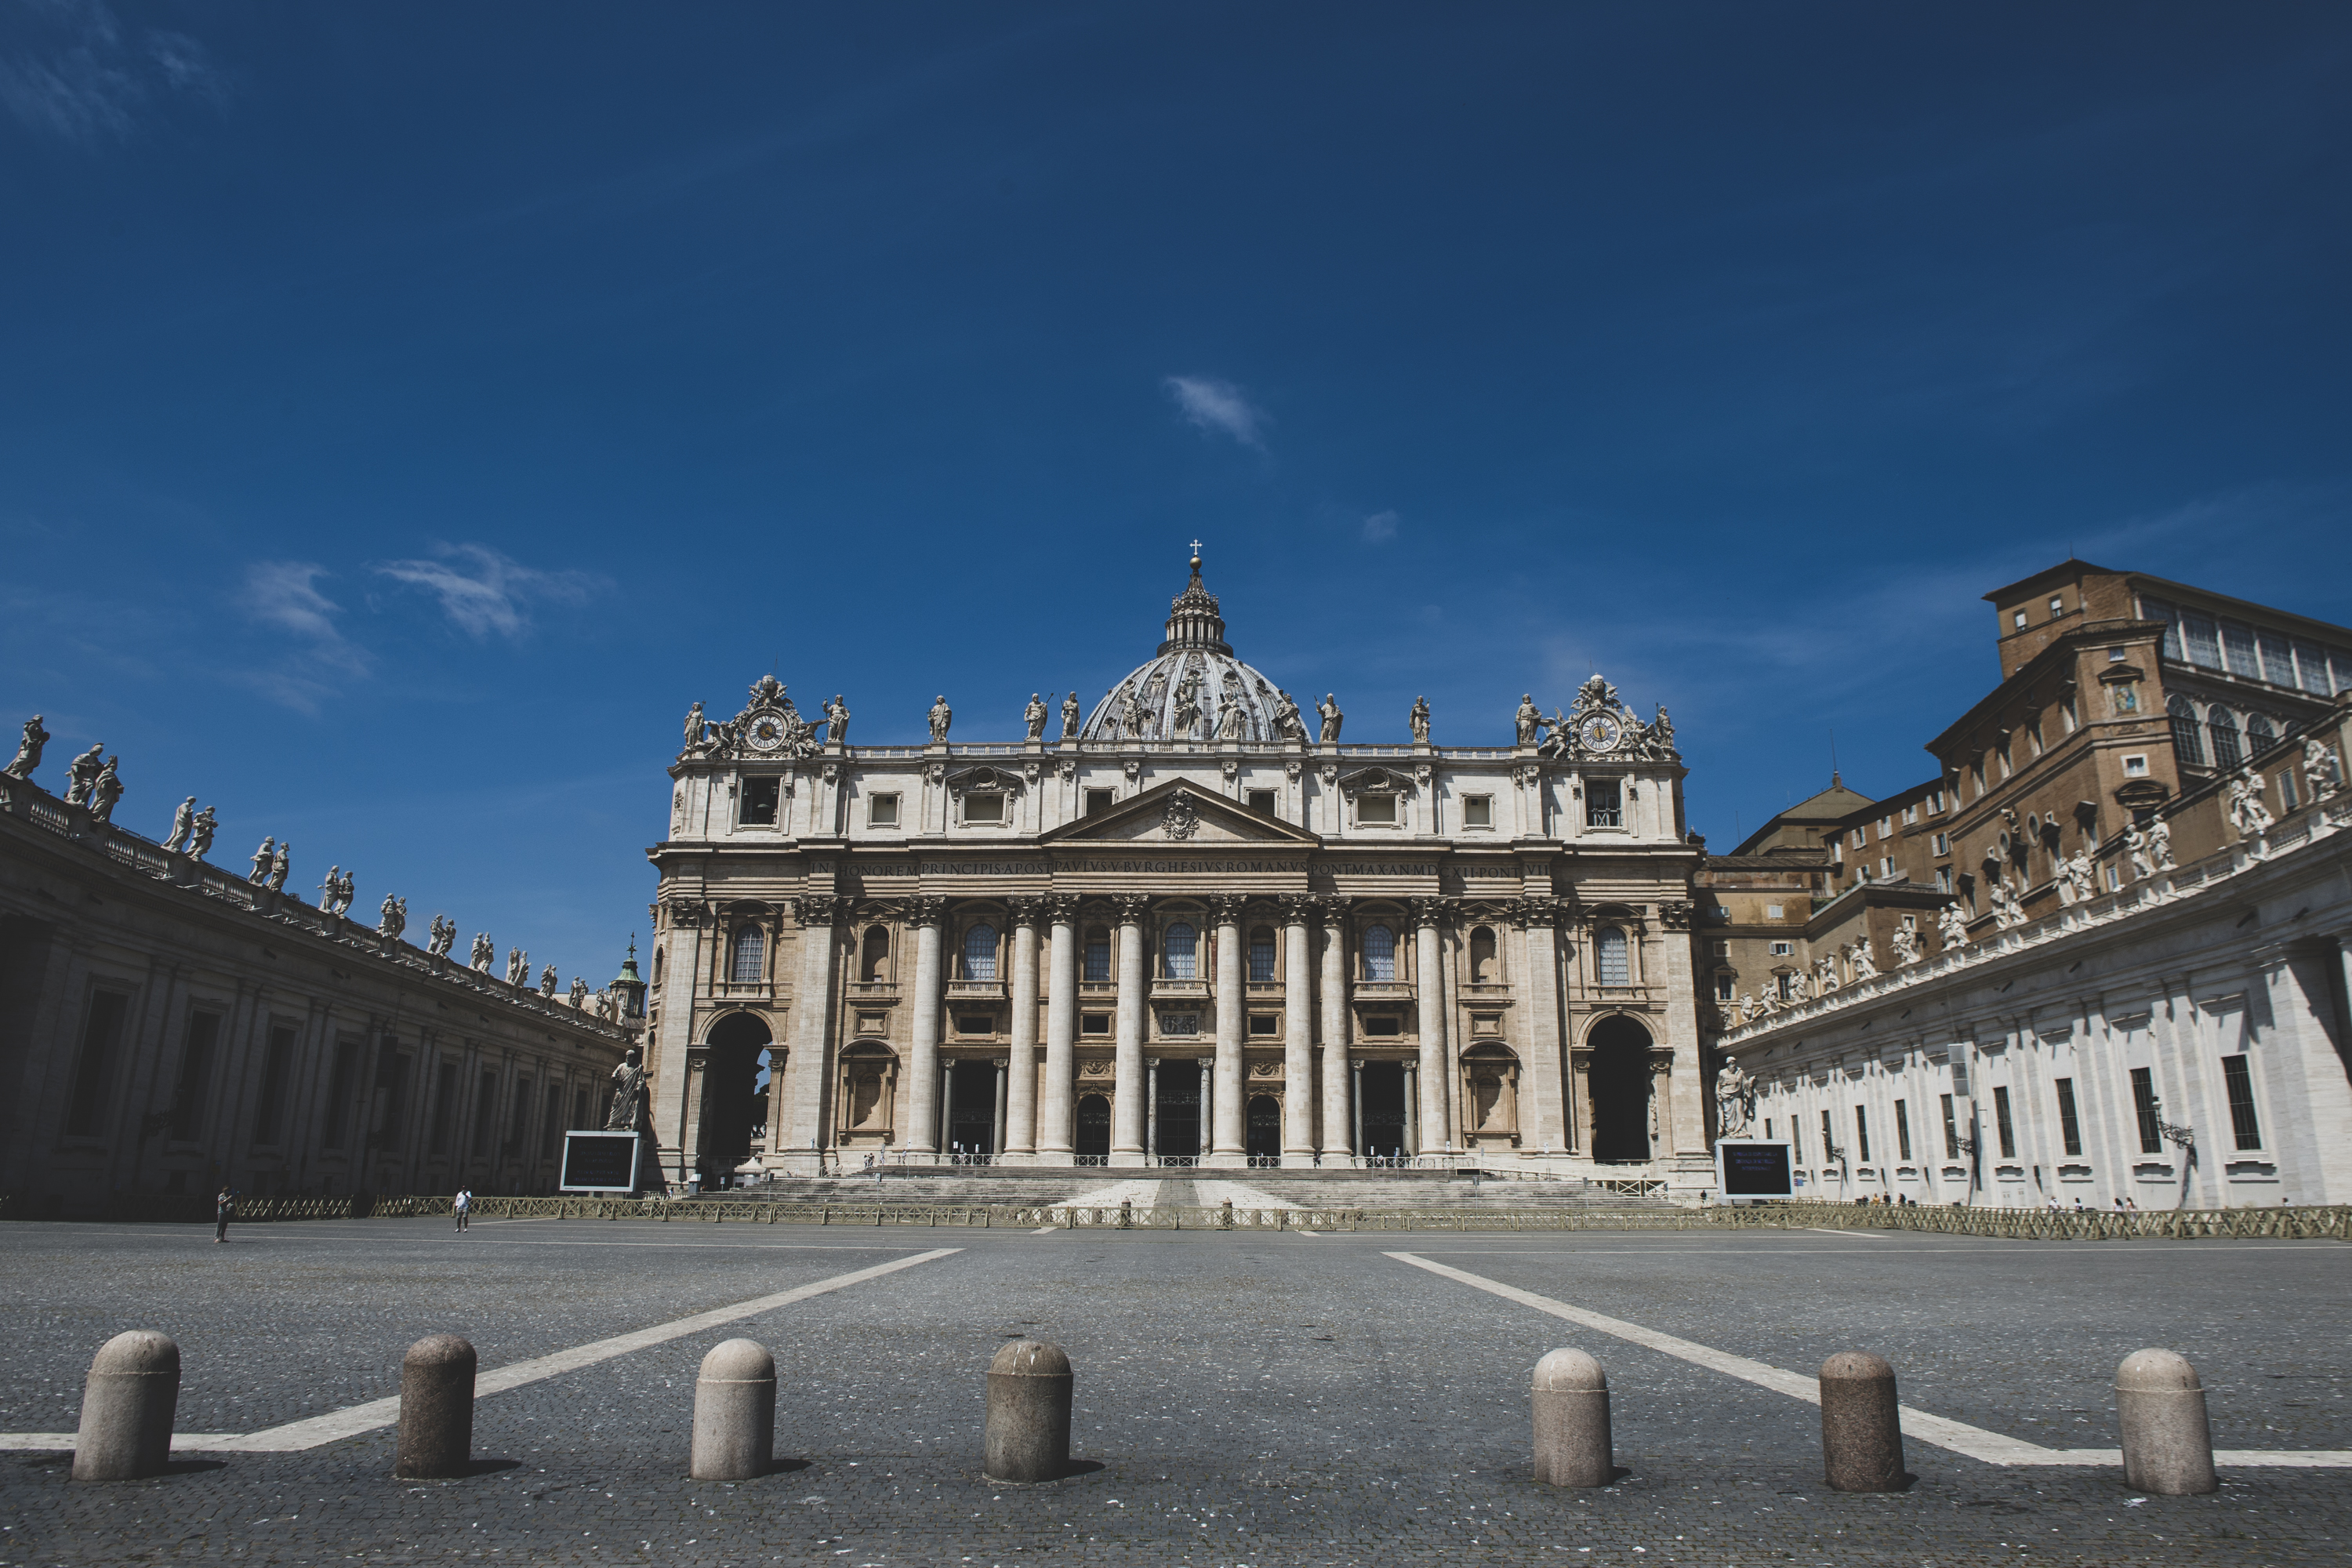 Holy See: Germany’s synodal path cannot make doctrinal decisions